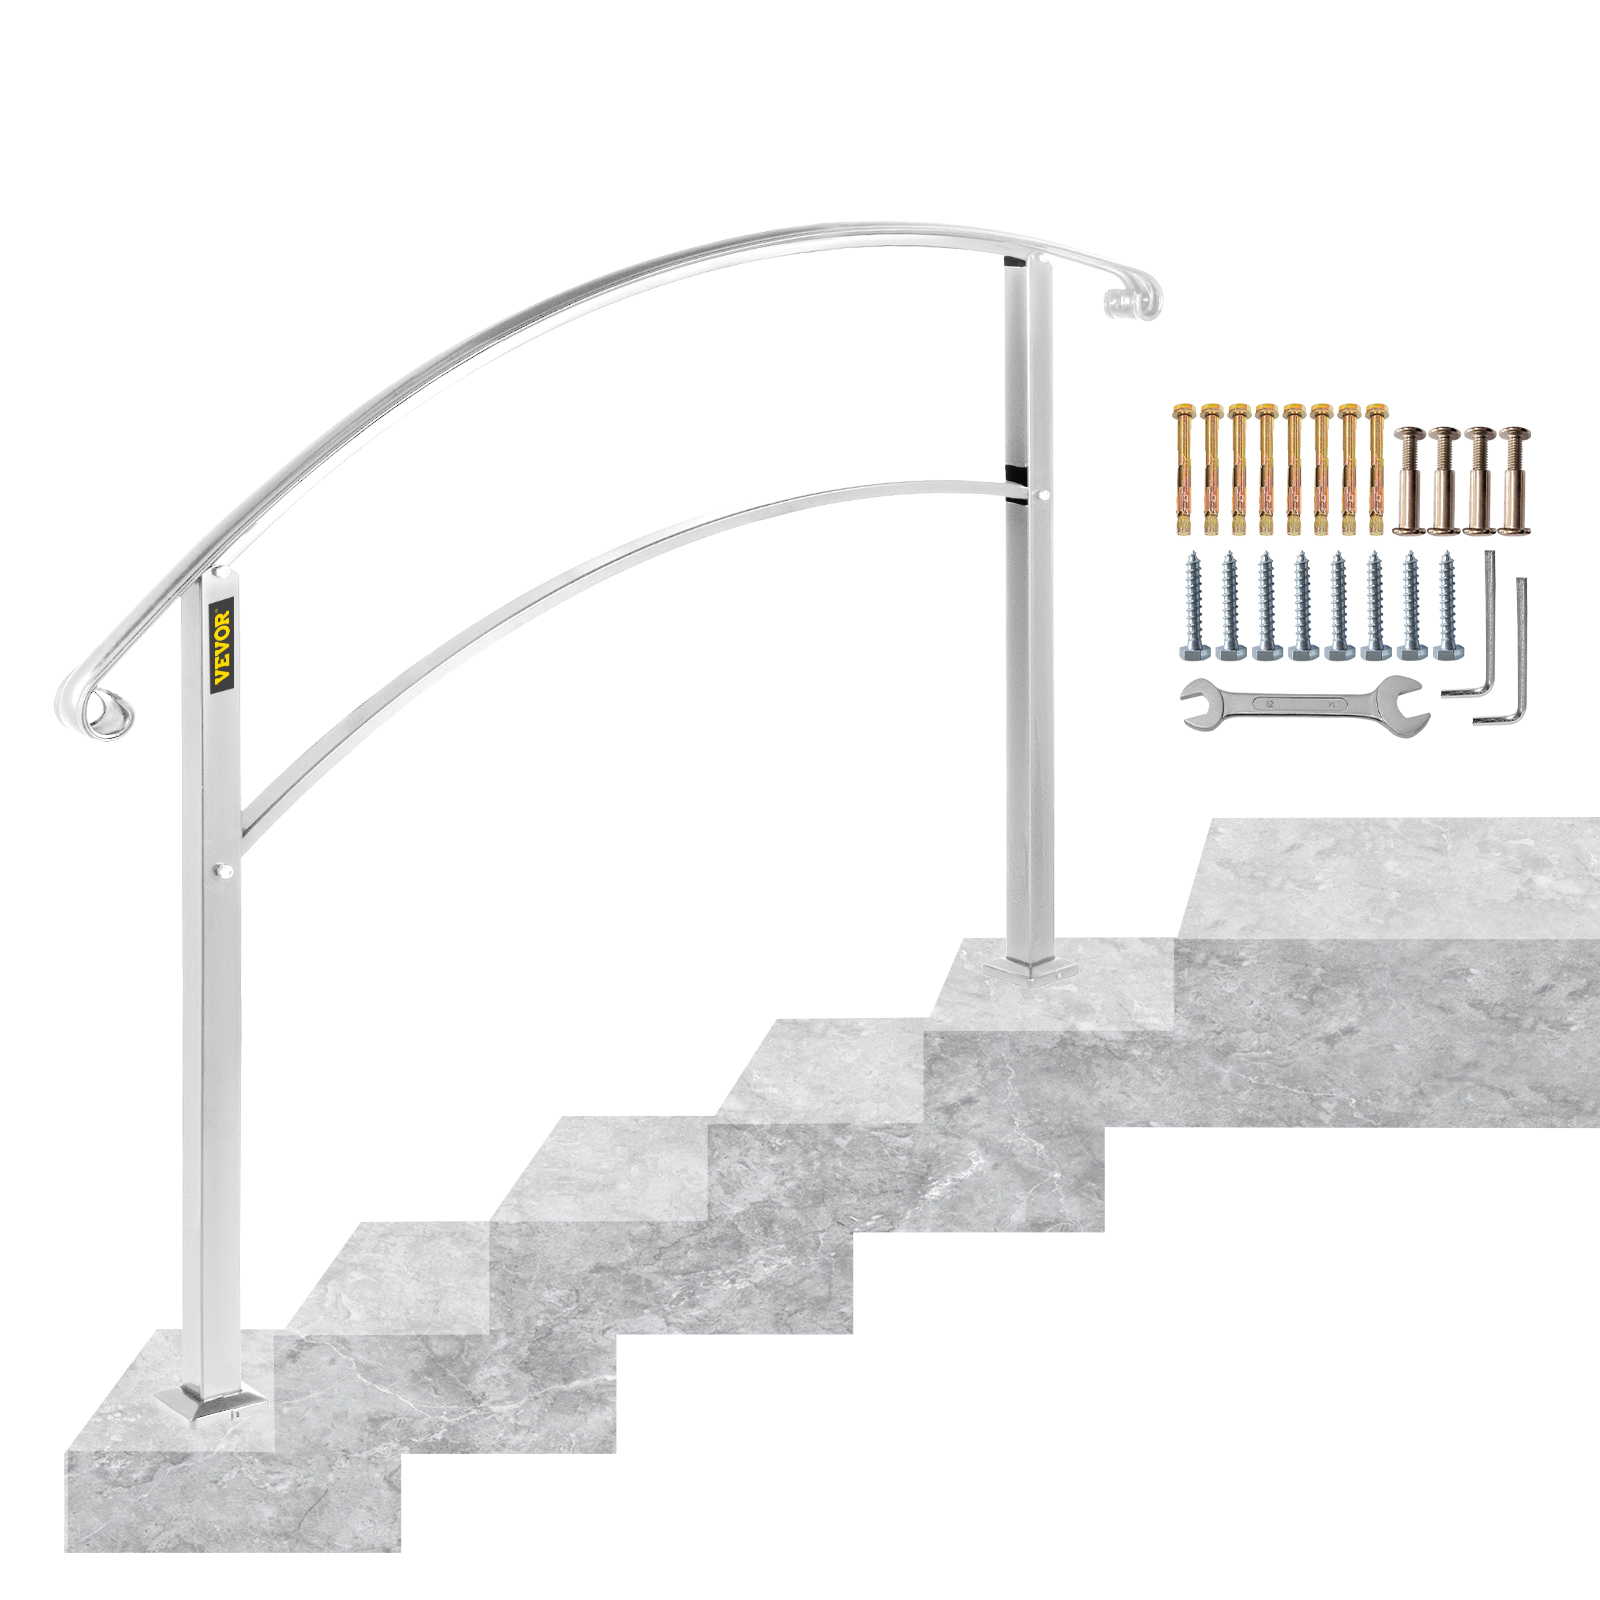 5ft Handrail Adjustable Fits 4-5 Steps Steady Houses Decoration от Vevor Many GEOs